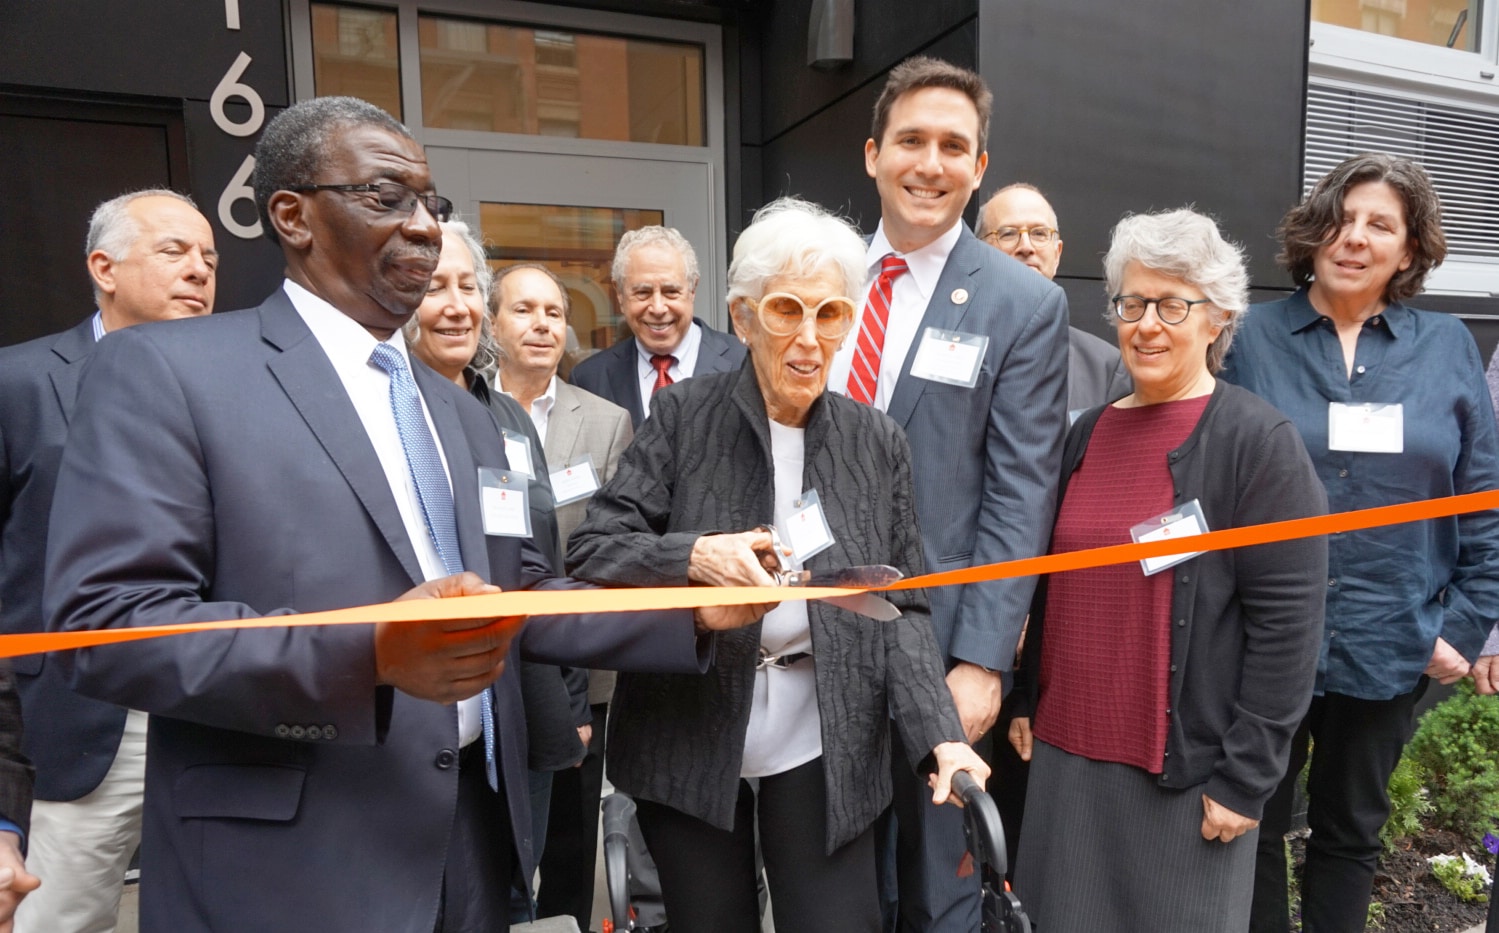 Howard Amron's widow, Joan Amron cuts the ribbon for the Howard Amron House with Council Ben Kallos, Urban Pathways CEO Fred Shack, family and board members looking on.  